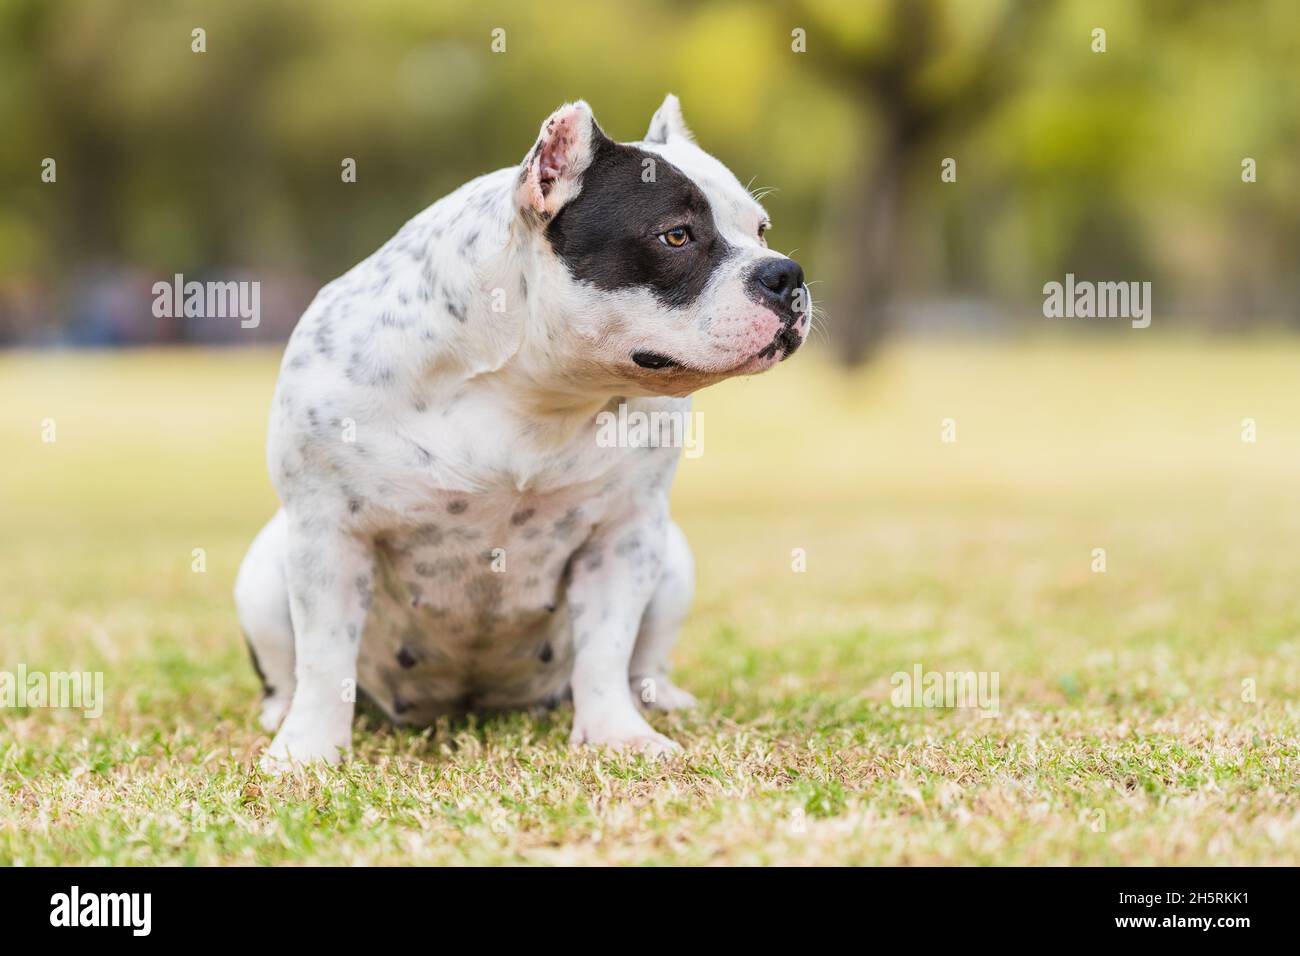 American bully dog sitting distracted while looking aside outdoors Stock Photo